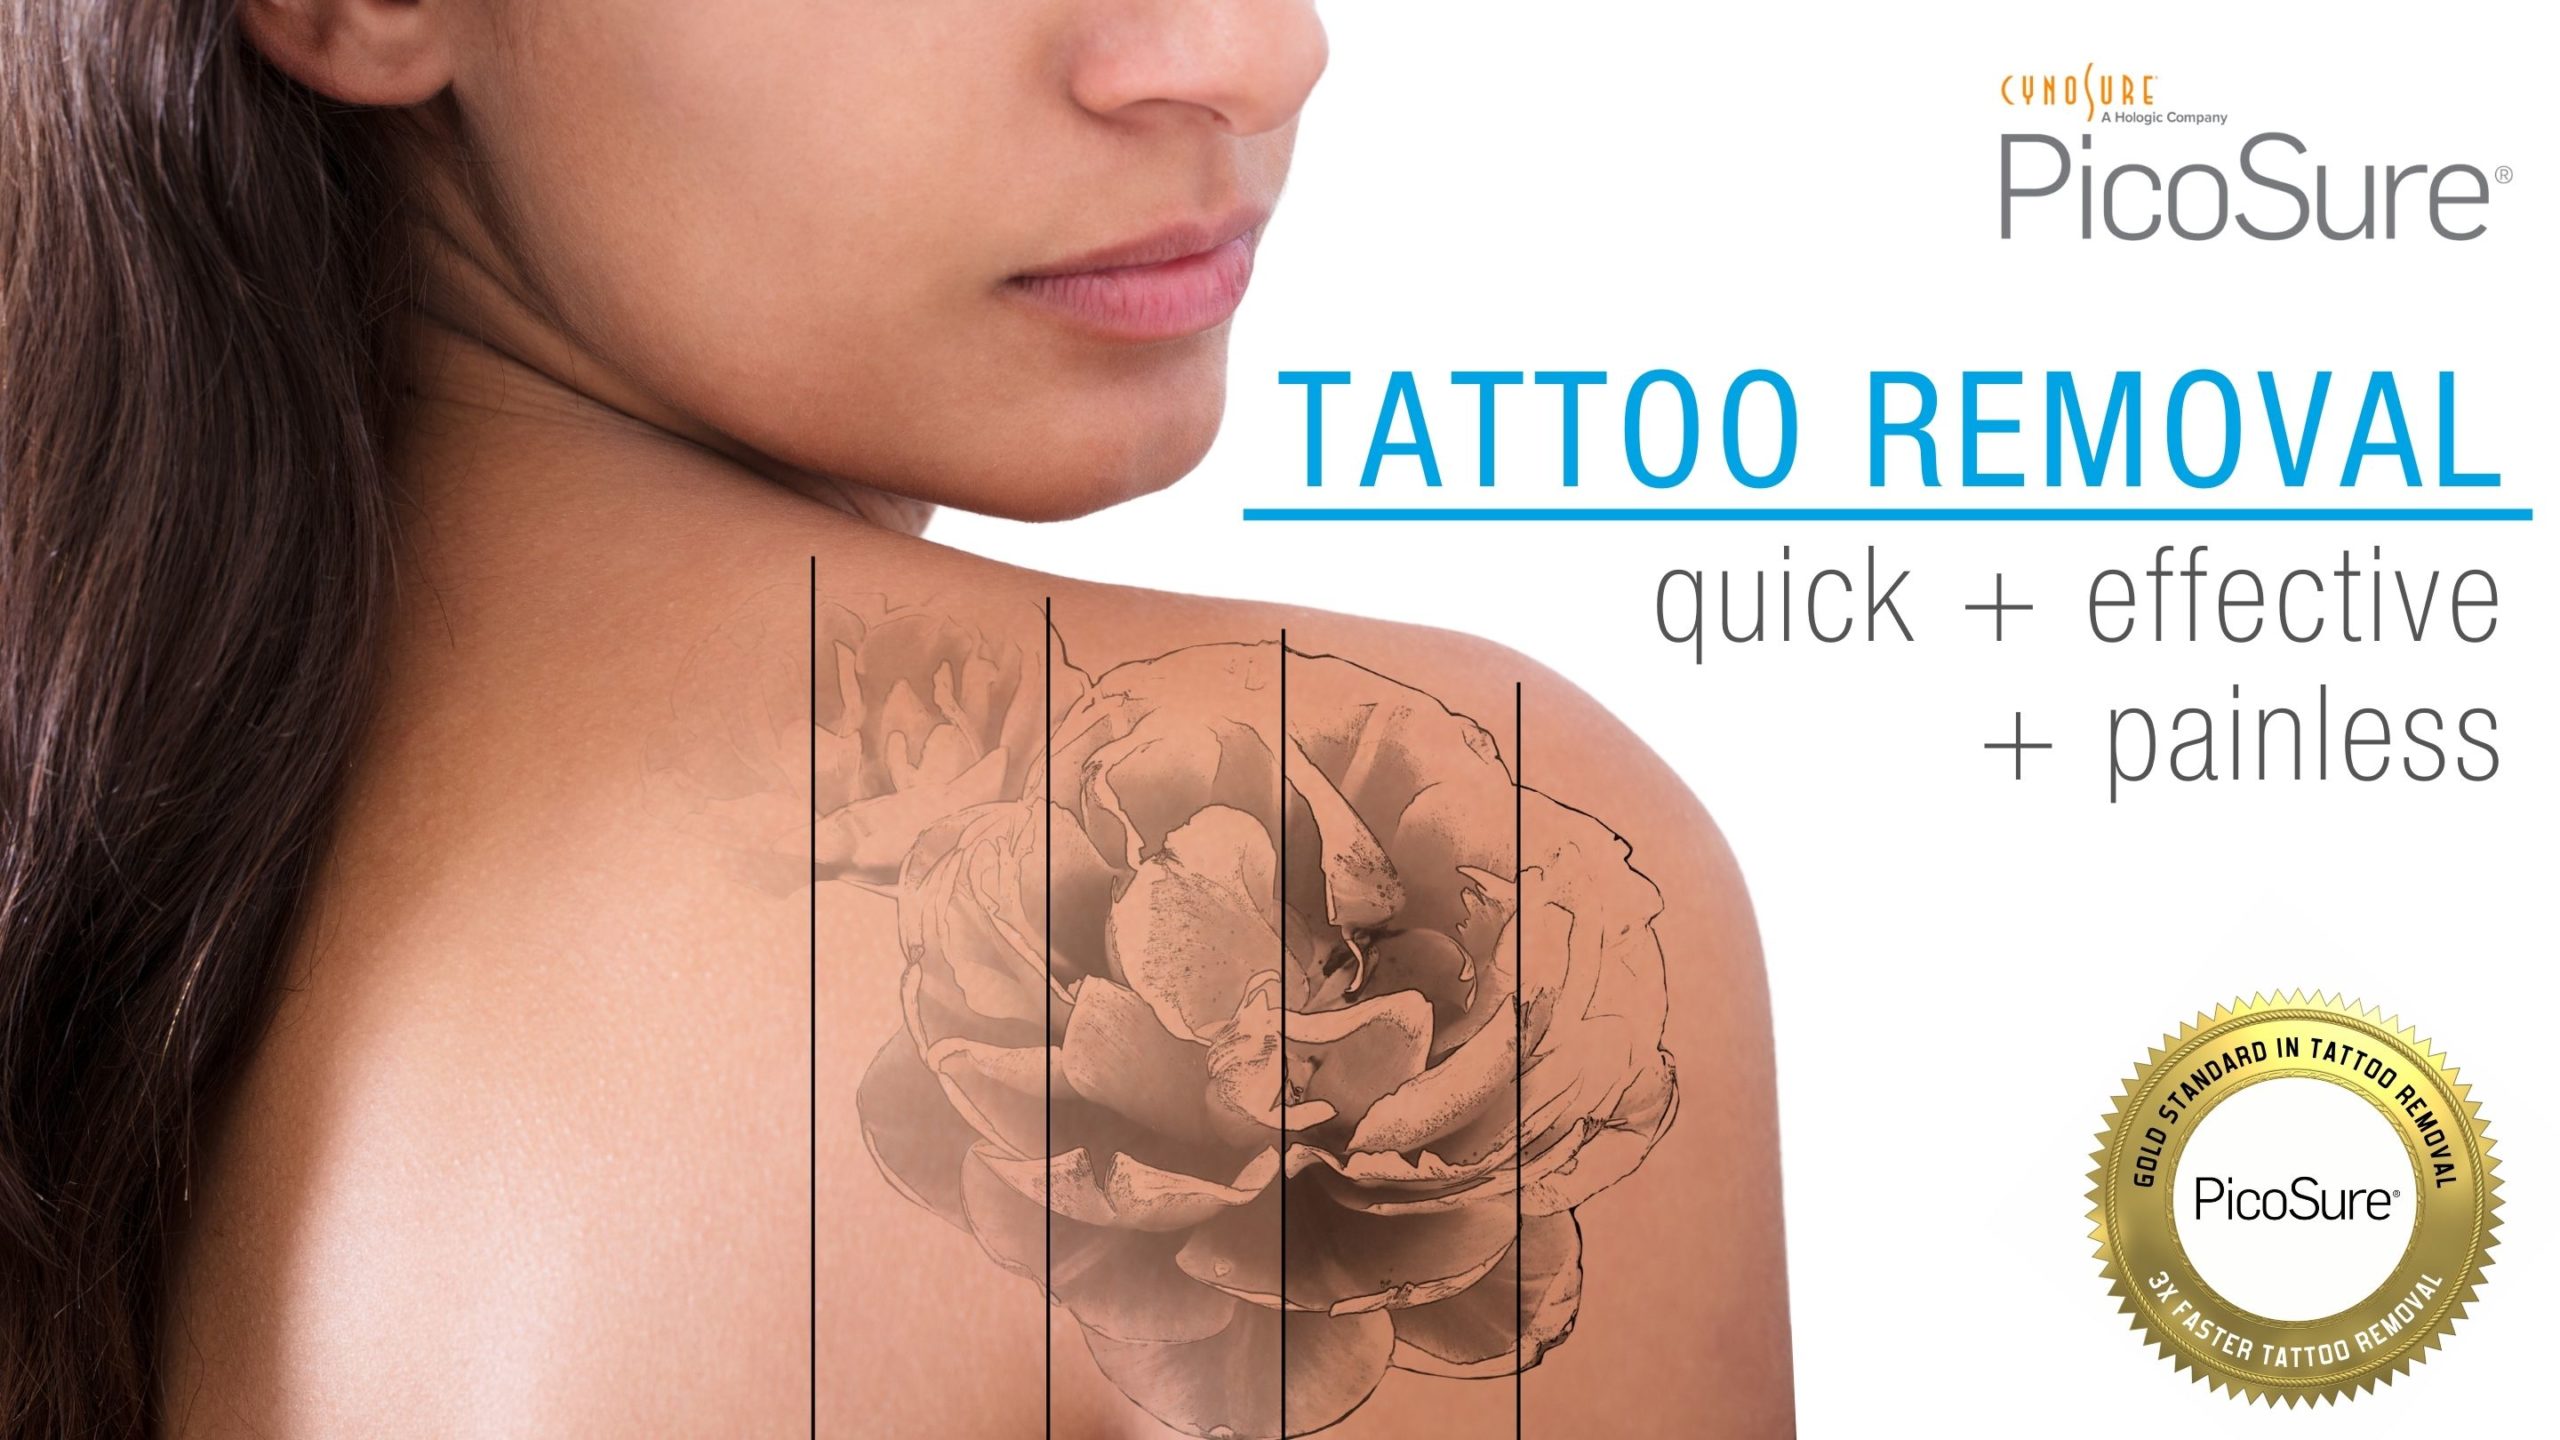 Laser Tattoo Removal with the PicoSure